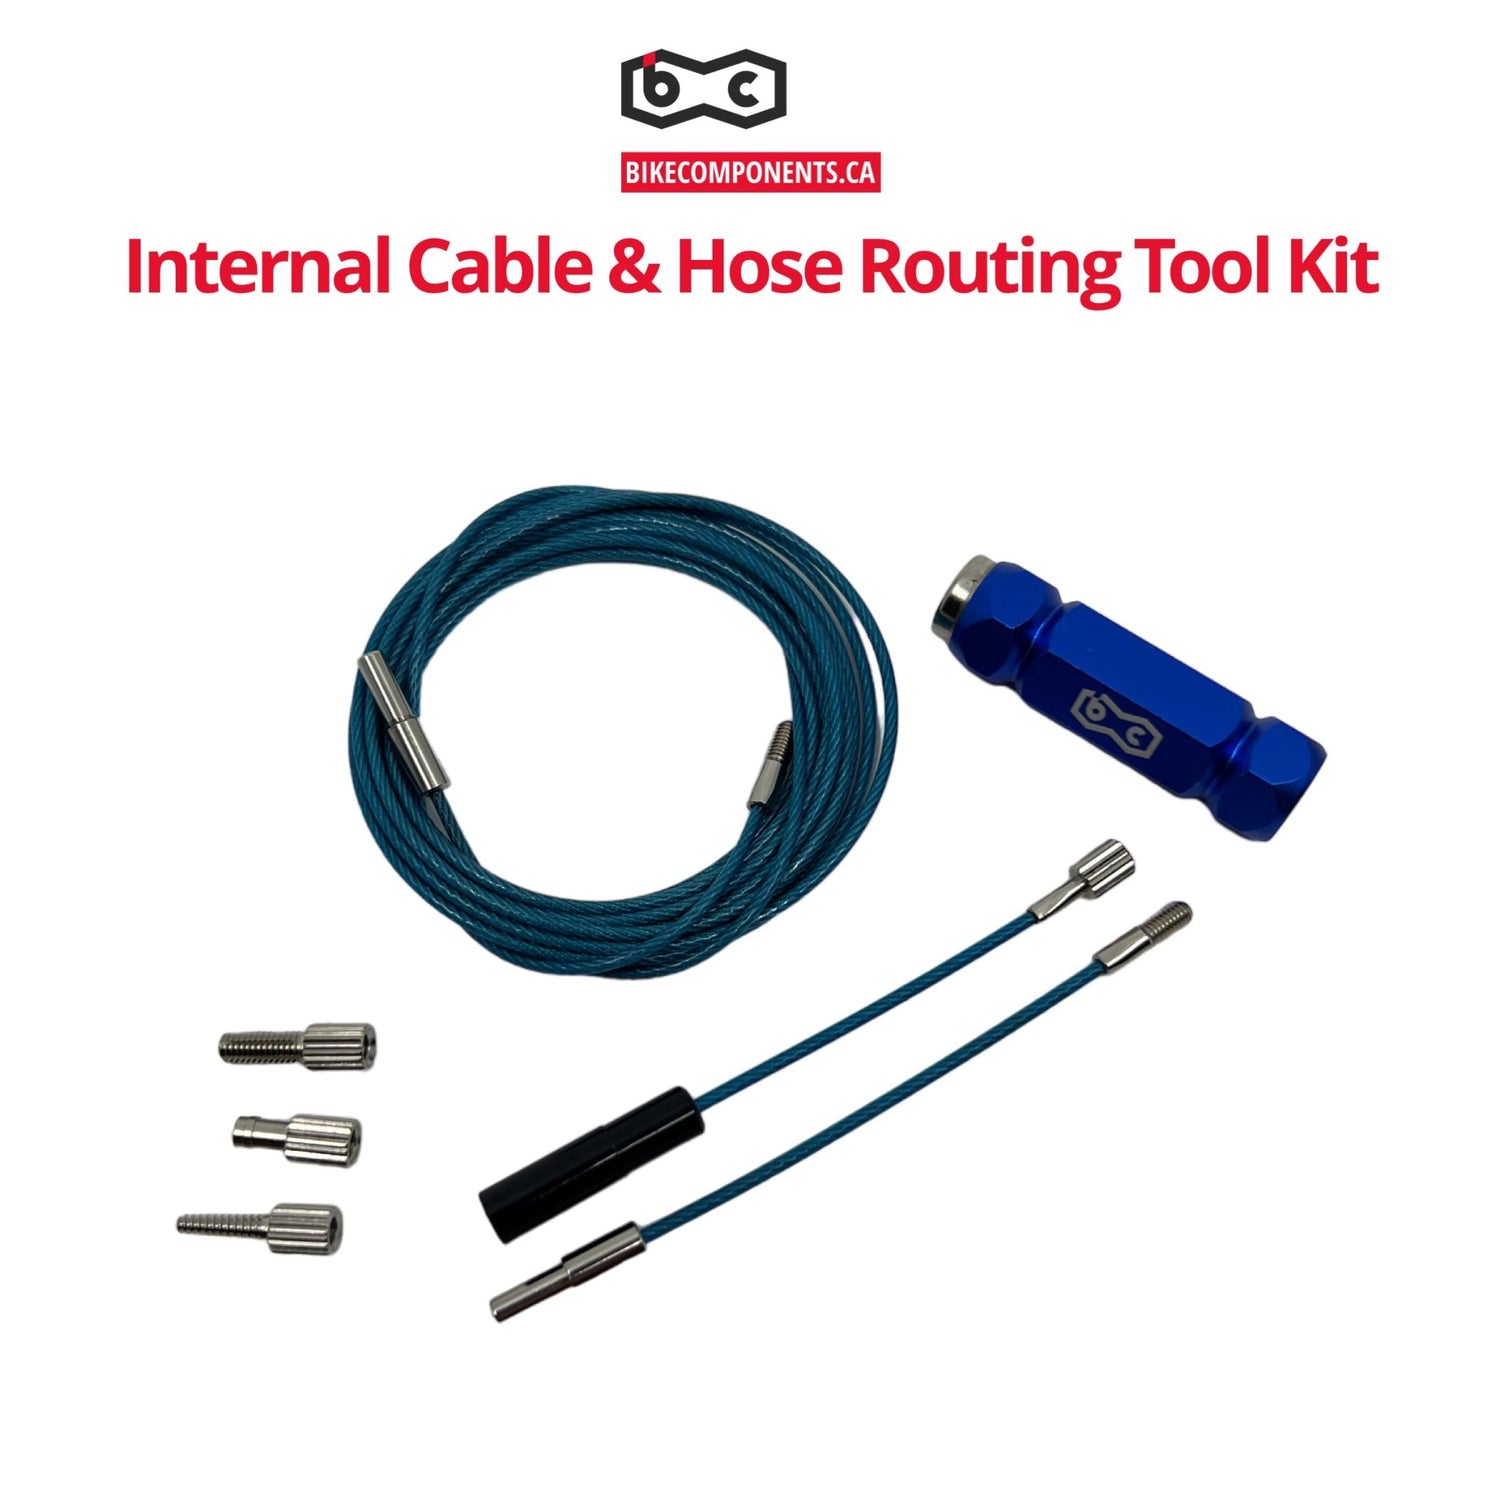 Internal Cable & Hose Routing Tool Kit